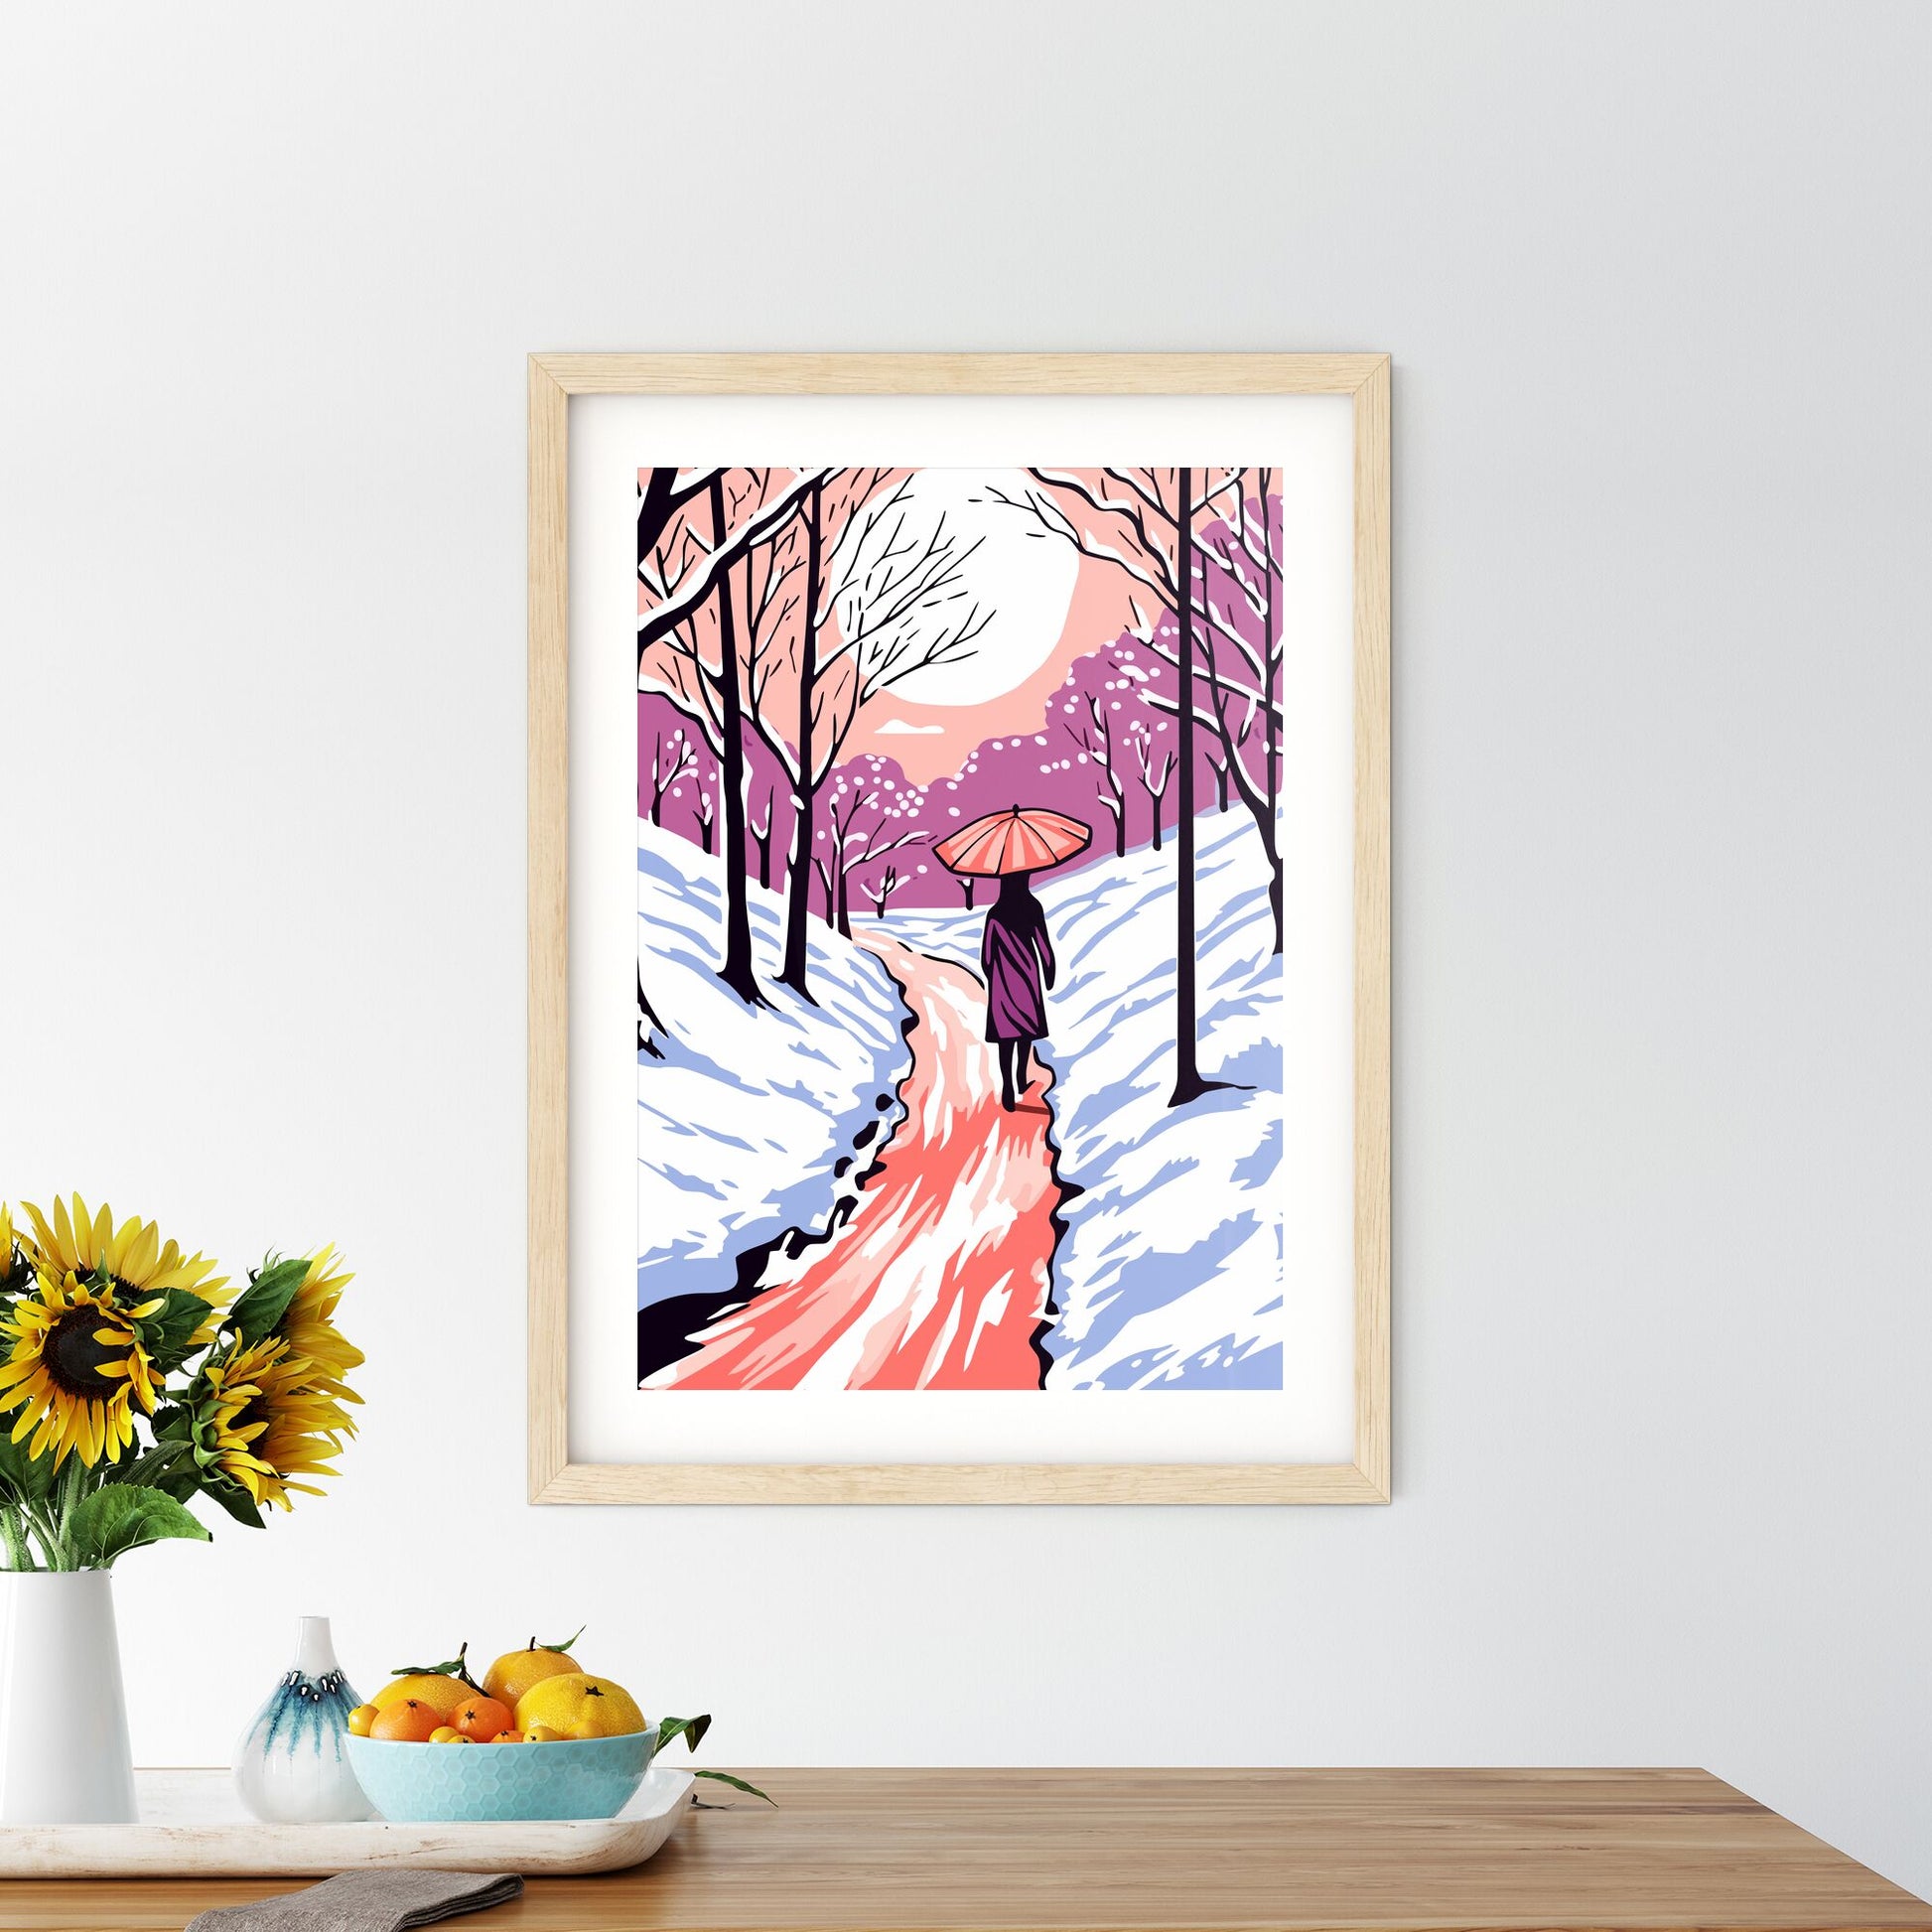 Girl With Umbrella Walking On The Path - A Woman Walking On A Snowy Path With A Pink Umbrella Default Title